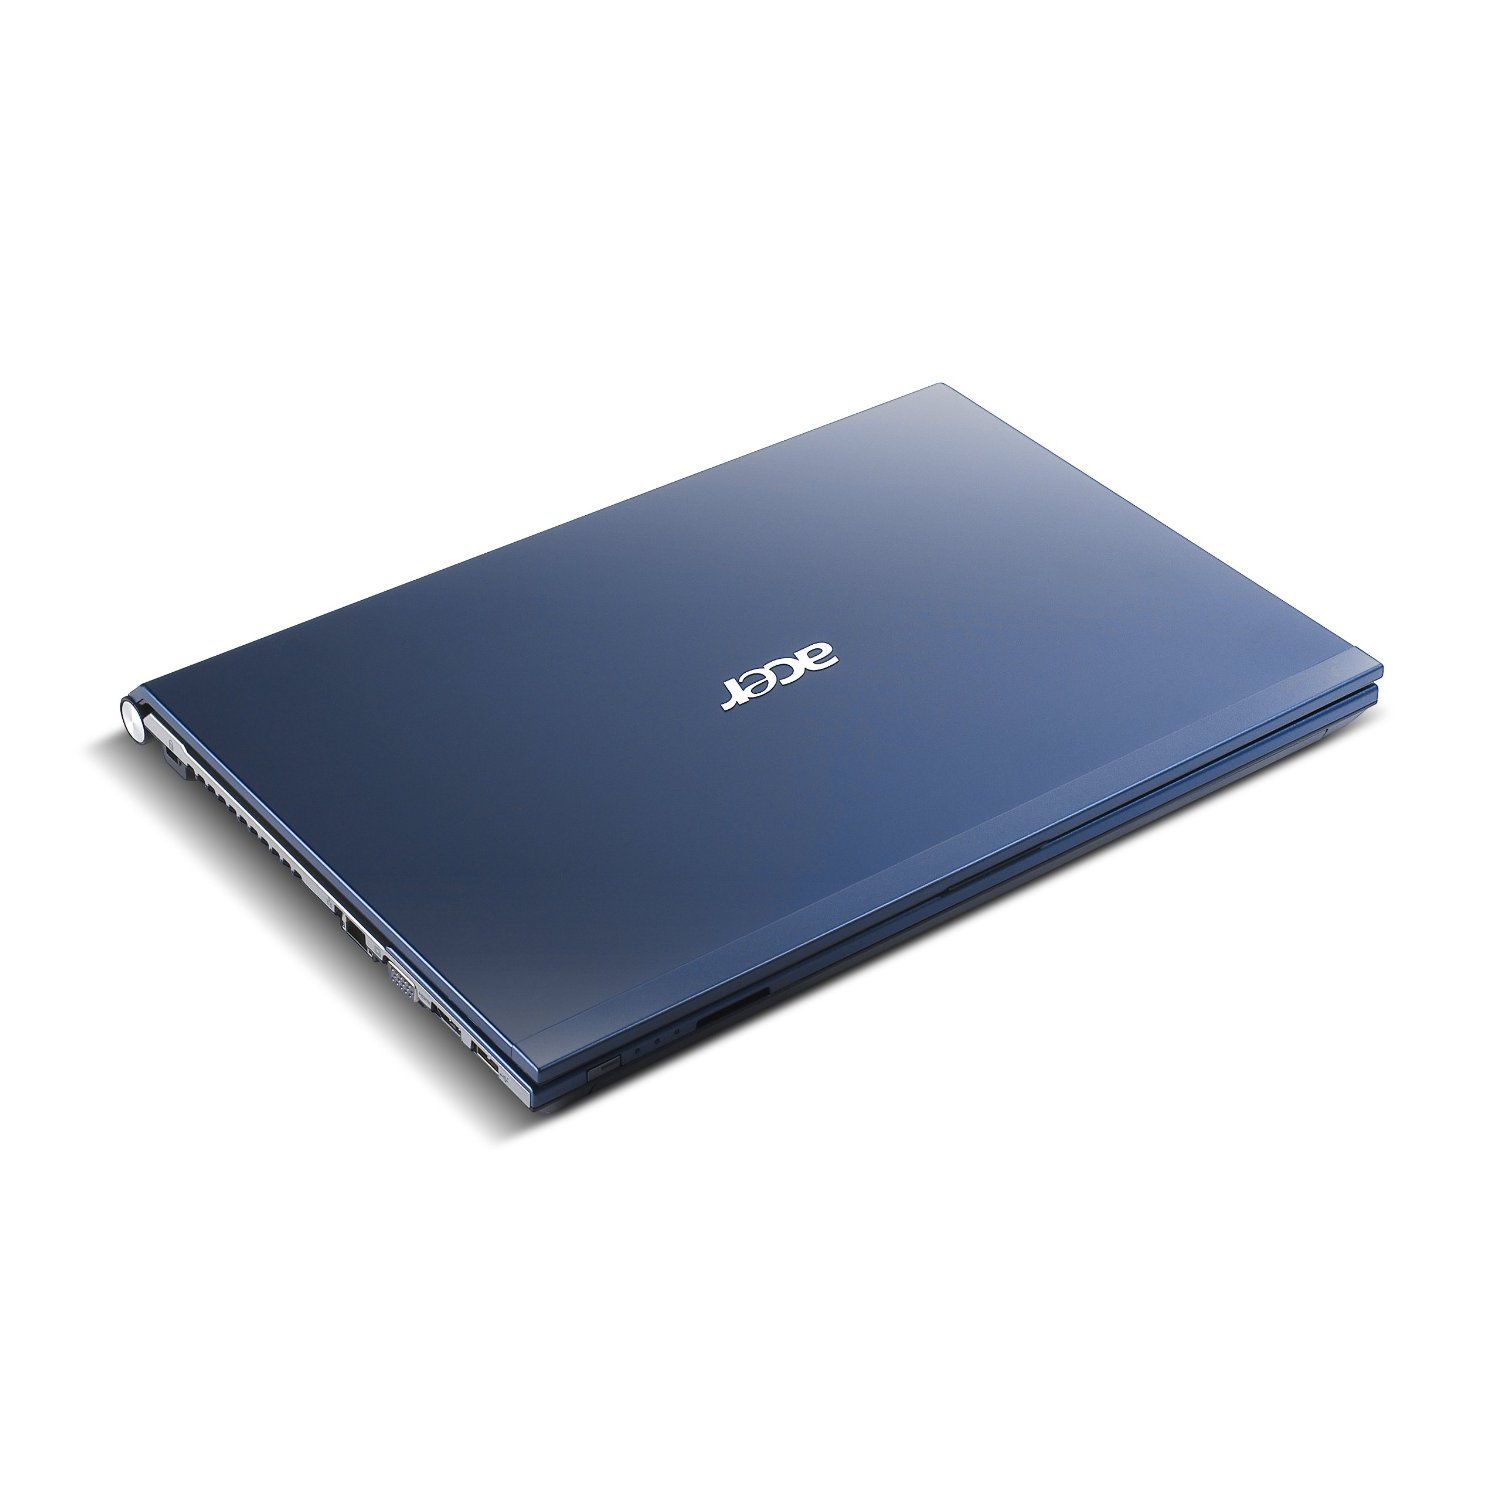 Acer Aspire TimelineX AS4830TG-6450 14-Inch Aluminum Laptop - Review ...